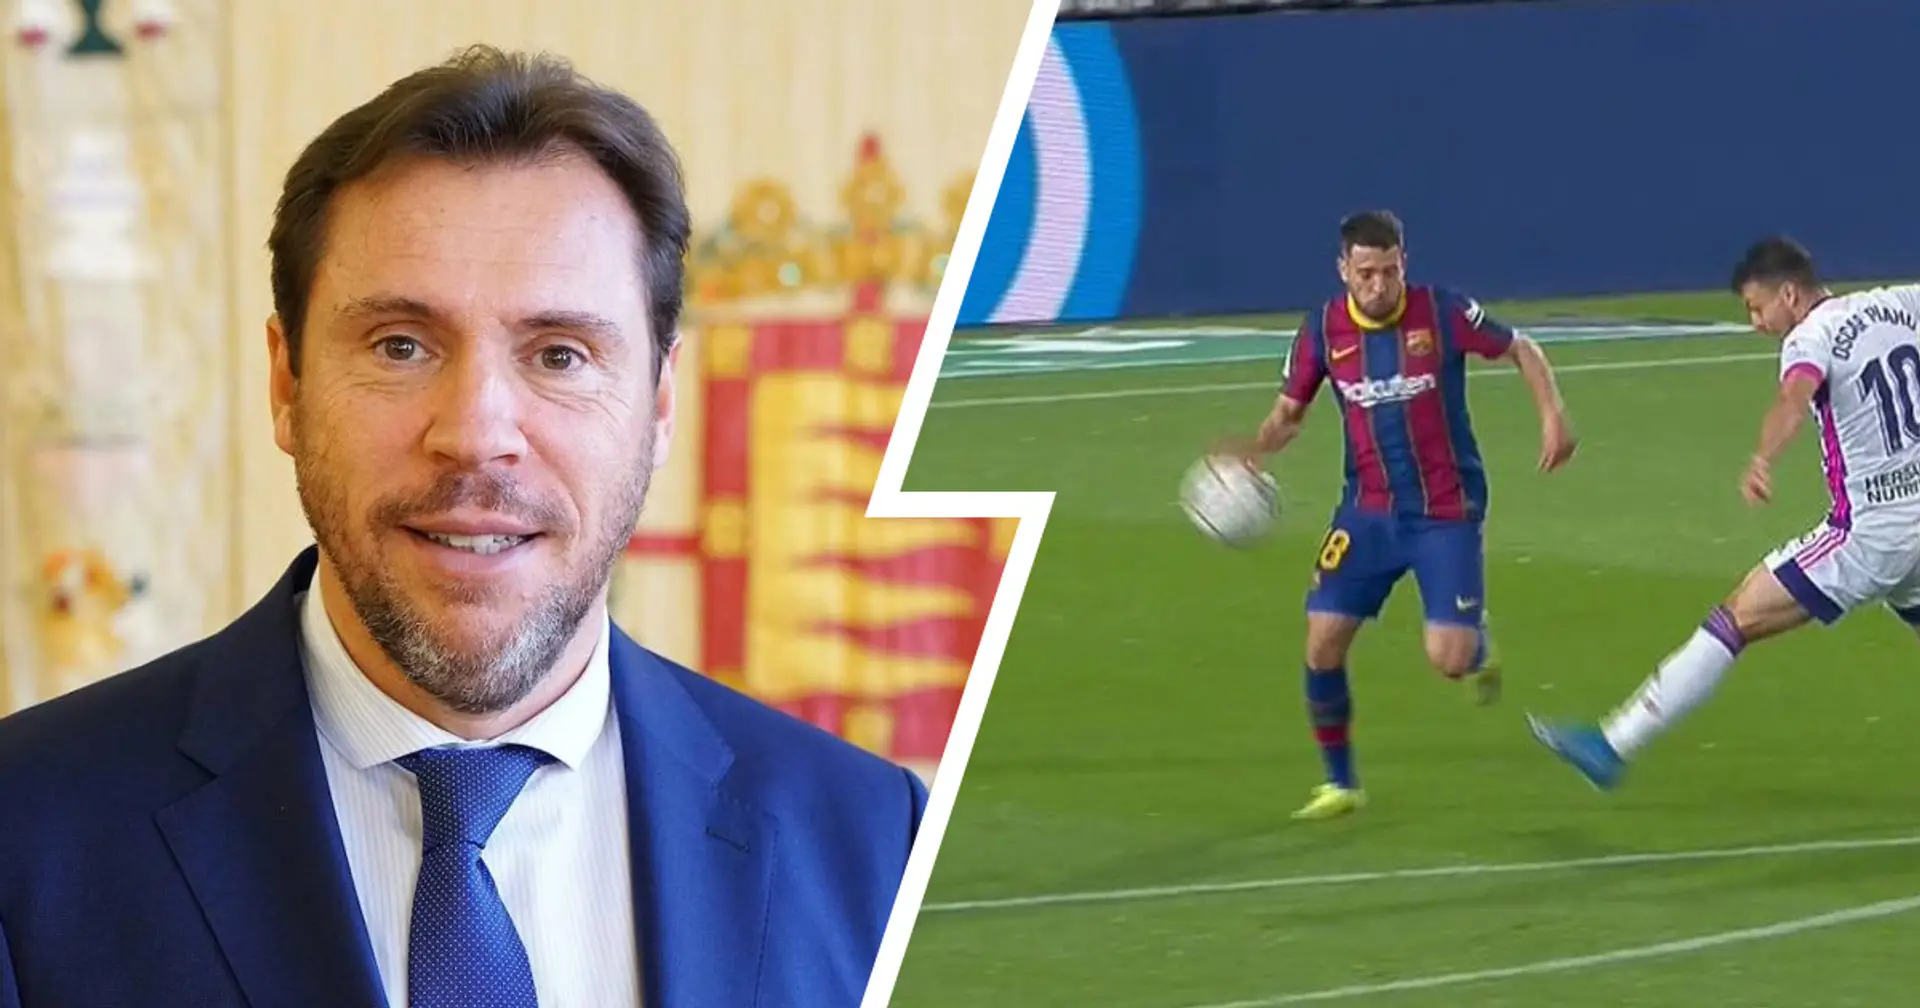 'It’s daylight robbery': Valladolid mayor launches scathing attack on Barcelona and referee after Monday's loss